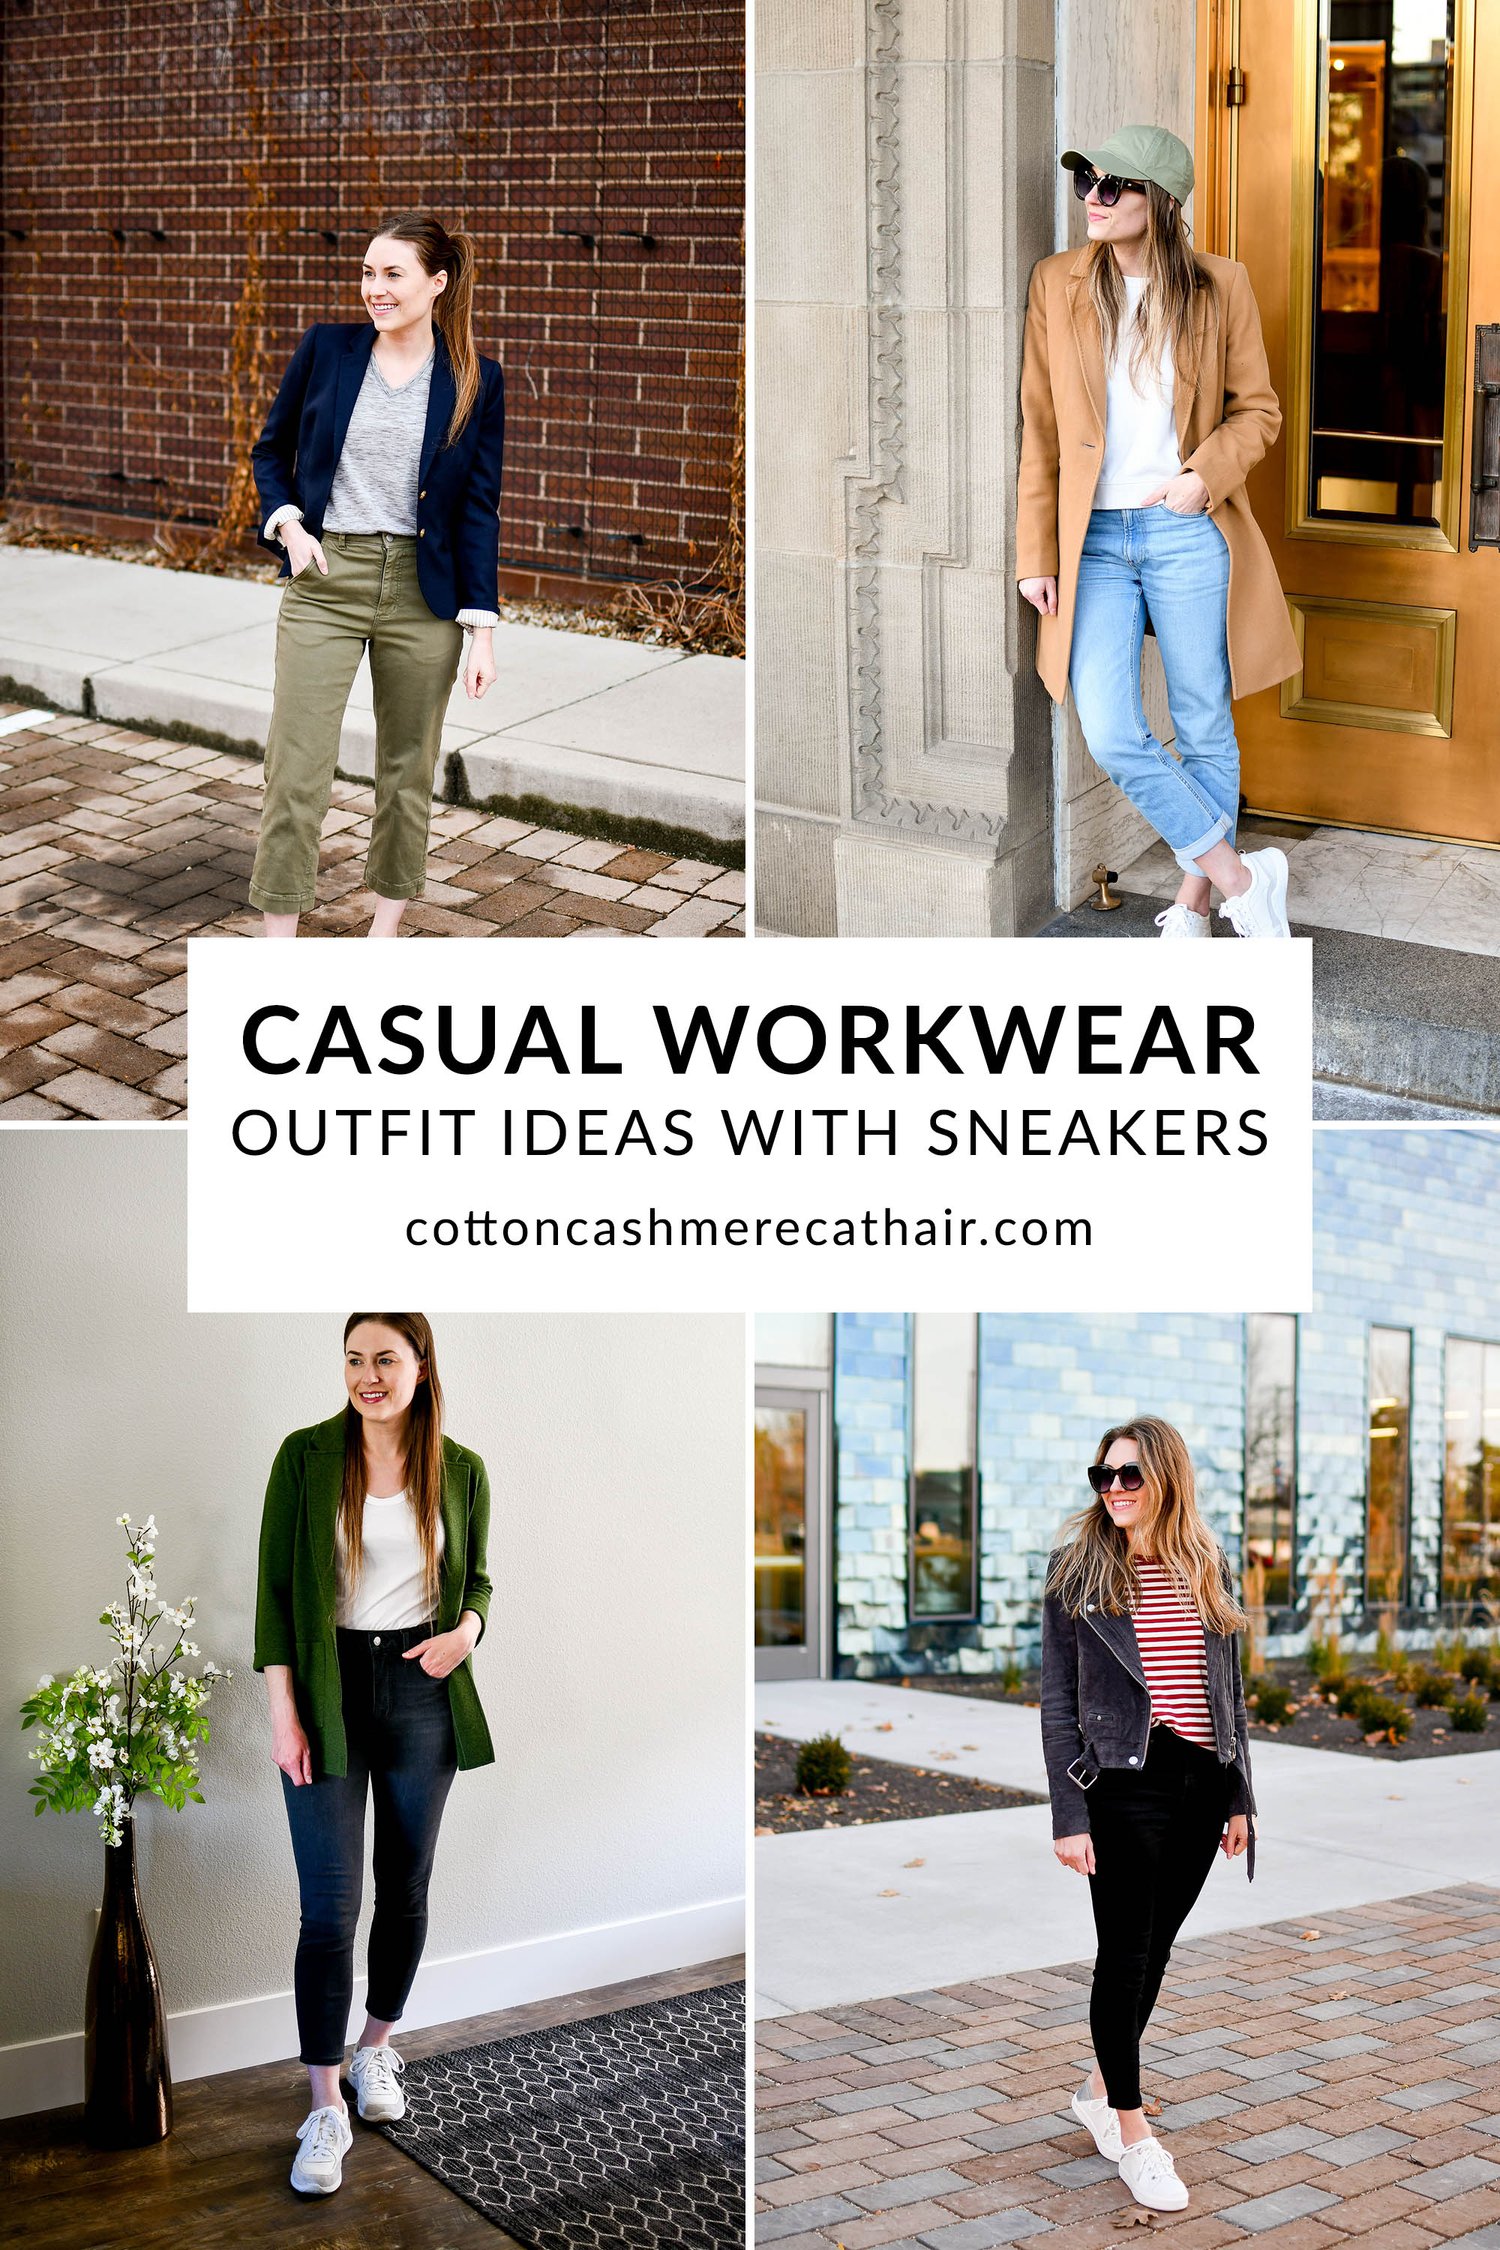 What to Wear with Khaki Pants - Petite Dressing  Dress pants outfits,  Casual work outfits, Khaki pants outfit